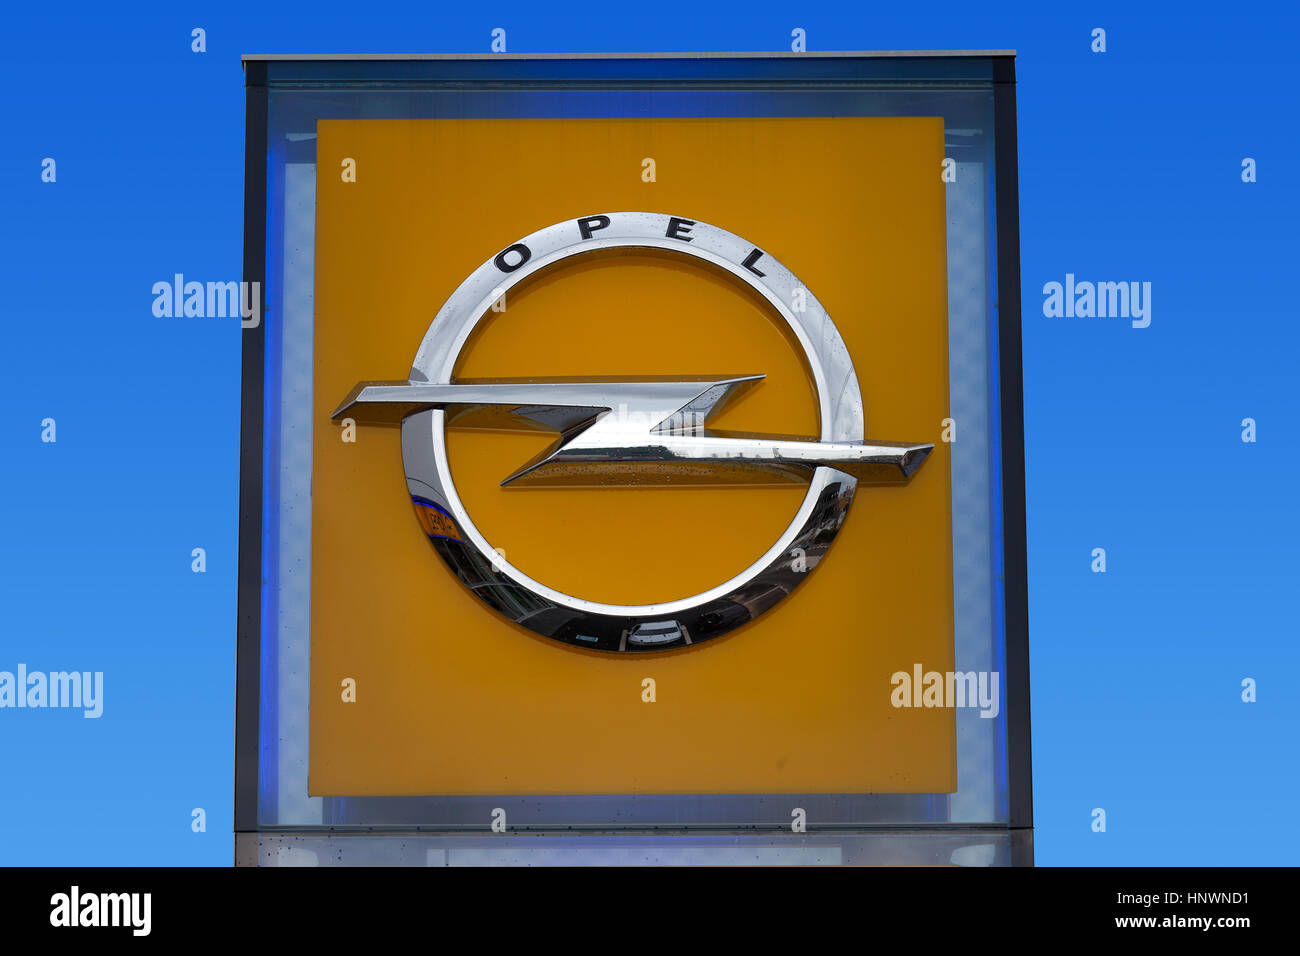 Opel sign at a local dealership. Opel is a German automobile manufacturer headquartered in Germany, subsidiary of the American group General Motors. Stock Photo